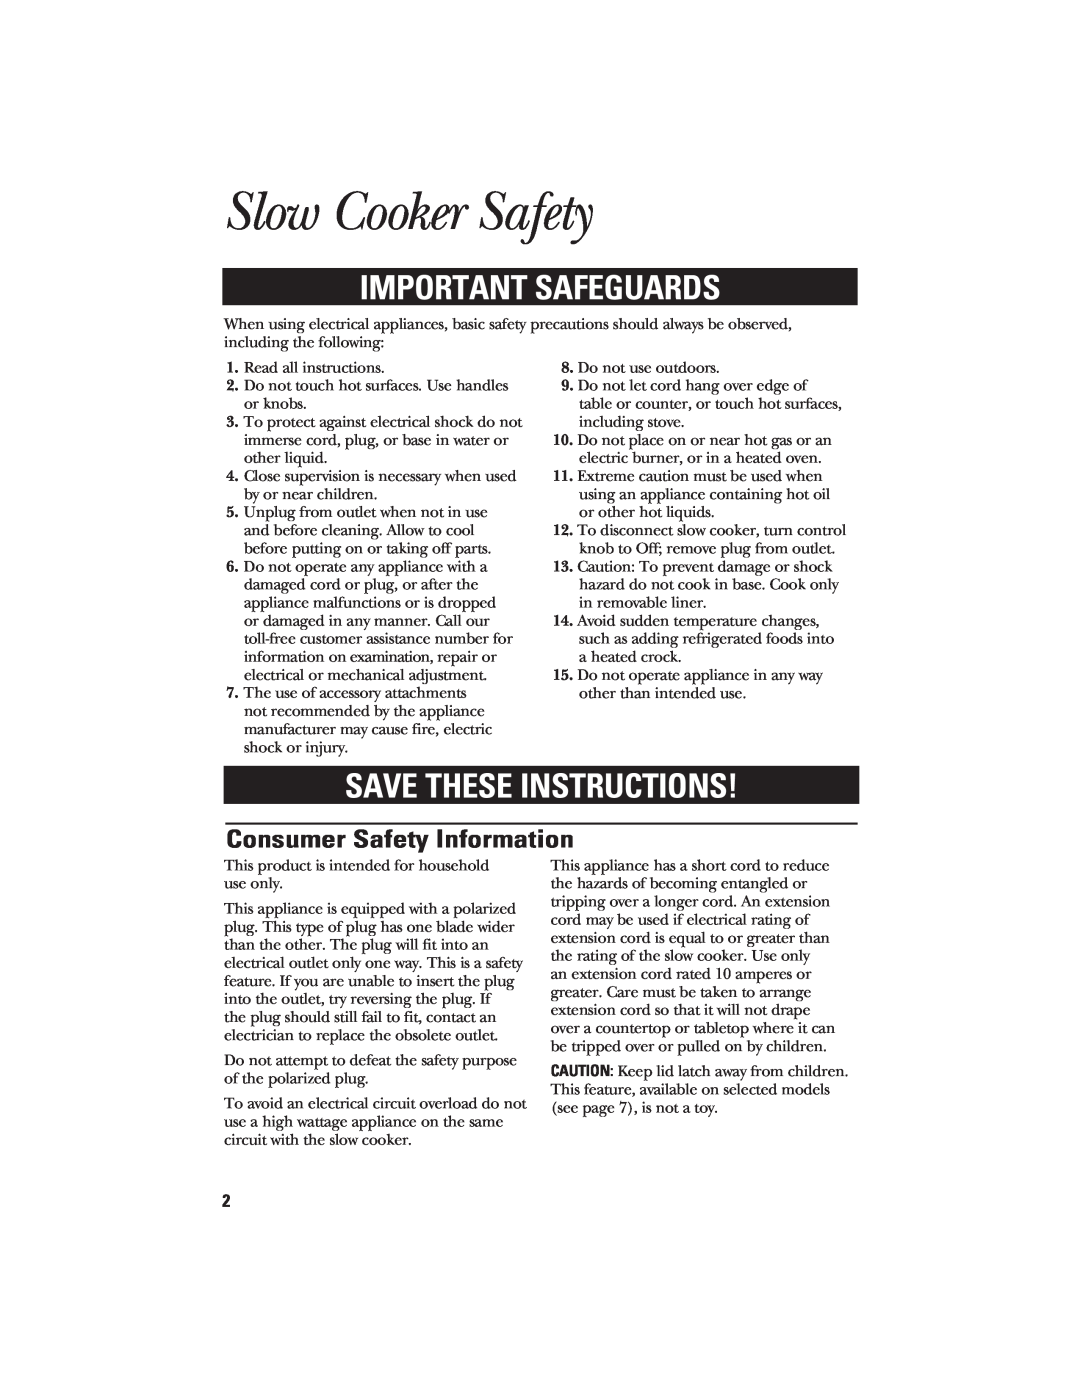 GE 840070700 manual Slow Cooker Safety, Consumer Safety Information, Important Safeguards, Save These Instructions 